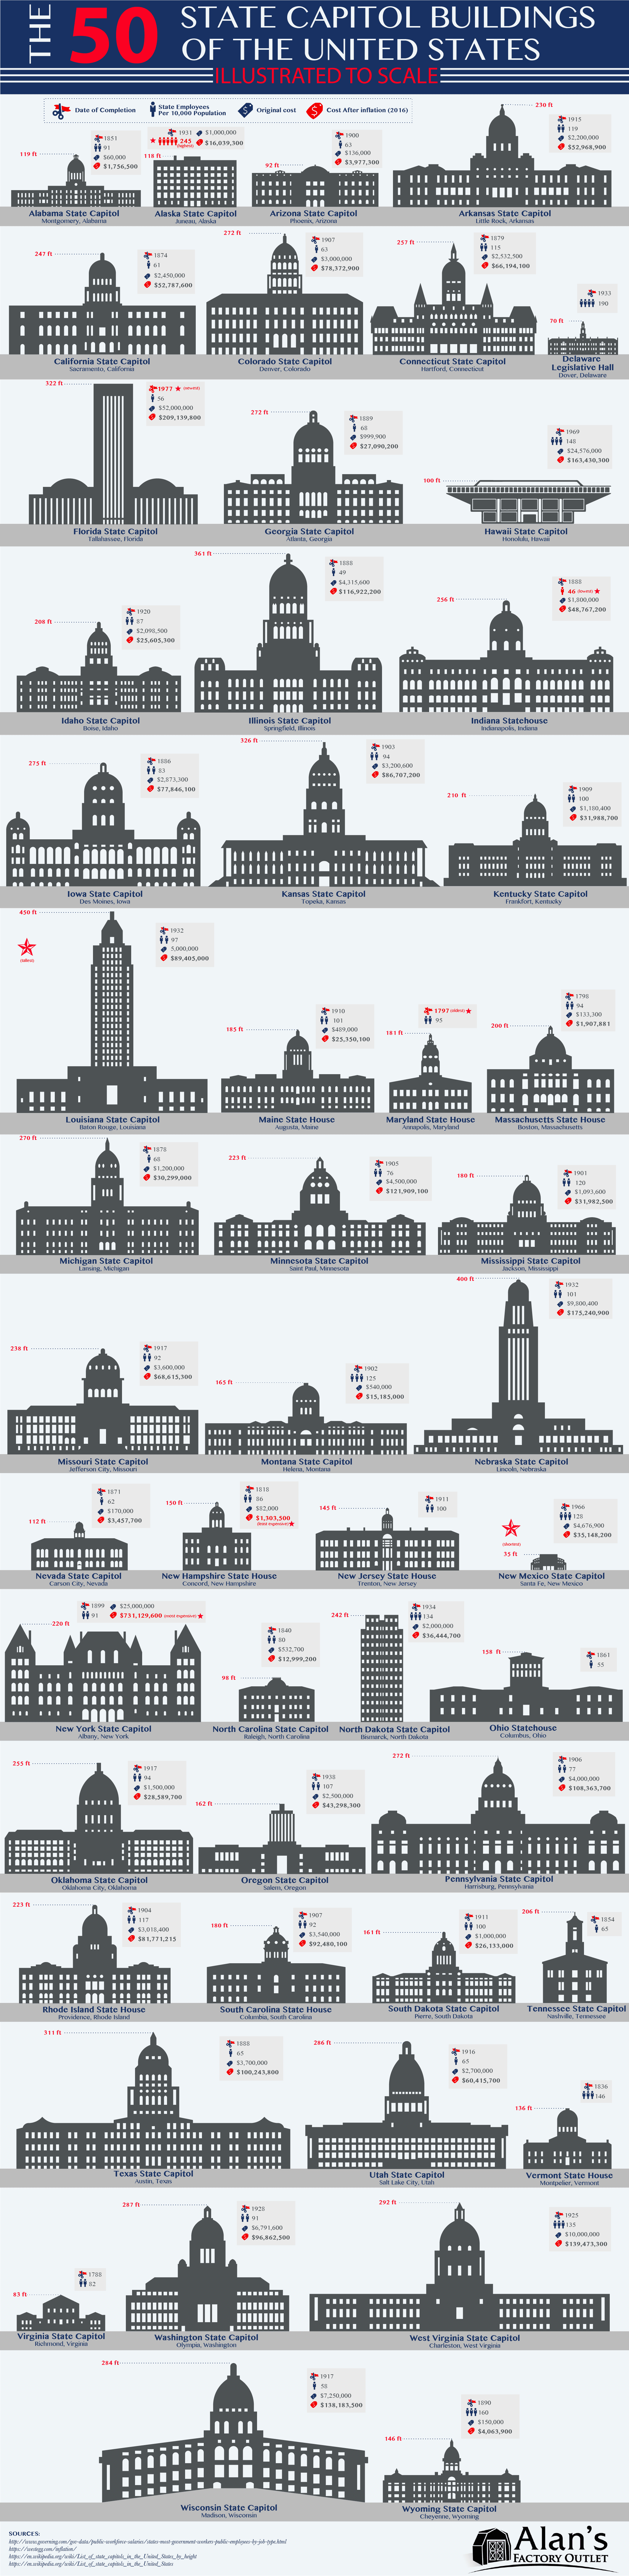 The 50 State Capitol Buildings of the United States Illustrated to Scale - AlansFactoryOutlet.com - Infographic